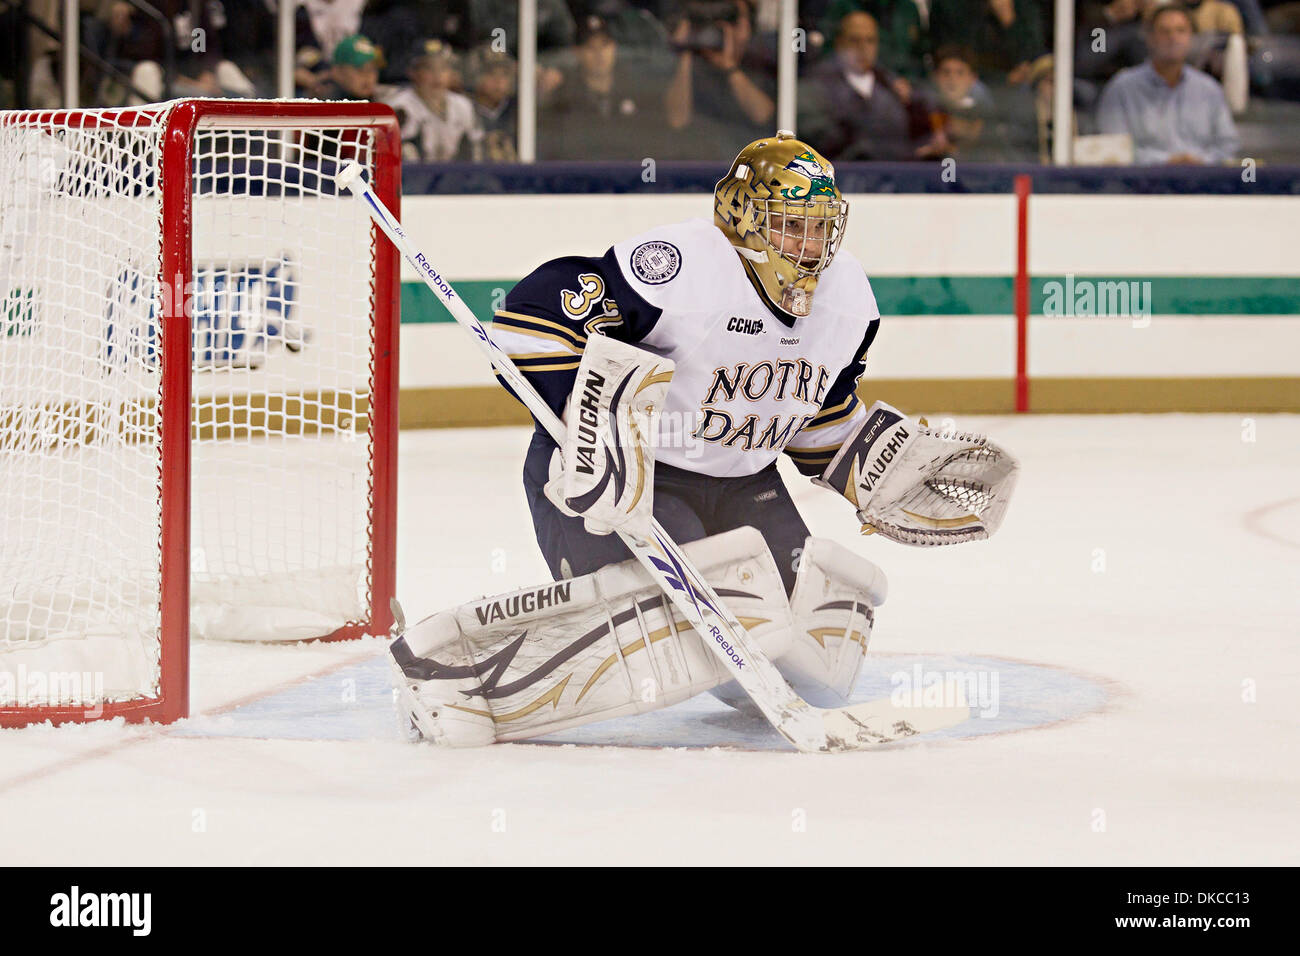 Oct. 21, 2011 - South Bend, Indiana, U.S - Notre Dame goaltender Mike Johnson (#32) goes into the butterfly position in first period action of NCAA hockey game between Notre Dame and Rensselaer Polytechnic Institute (RPI).  The Notre Dame Fighting Irish defeated Rensselaer Polytechnic Institute (RPI) Engineers 5-2 in game at the Compton Family Ice Arena in South Bend, Indiana. (Cre Stock Photo